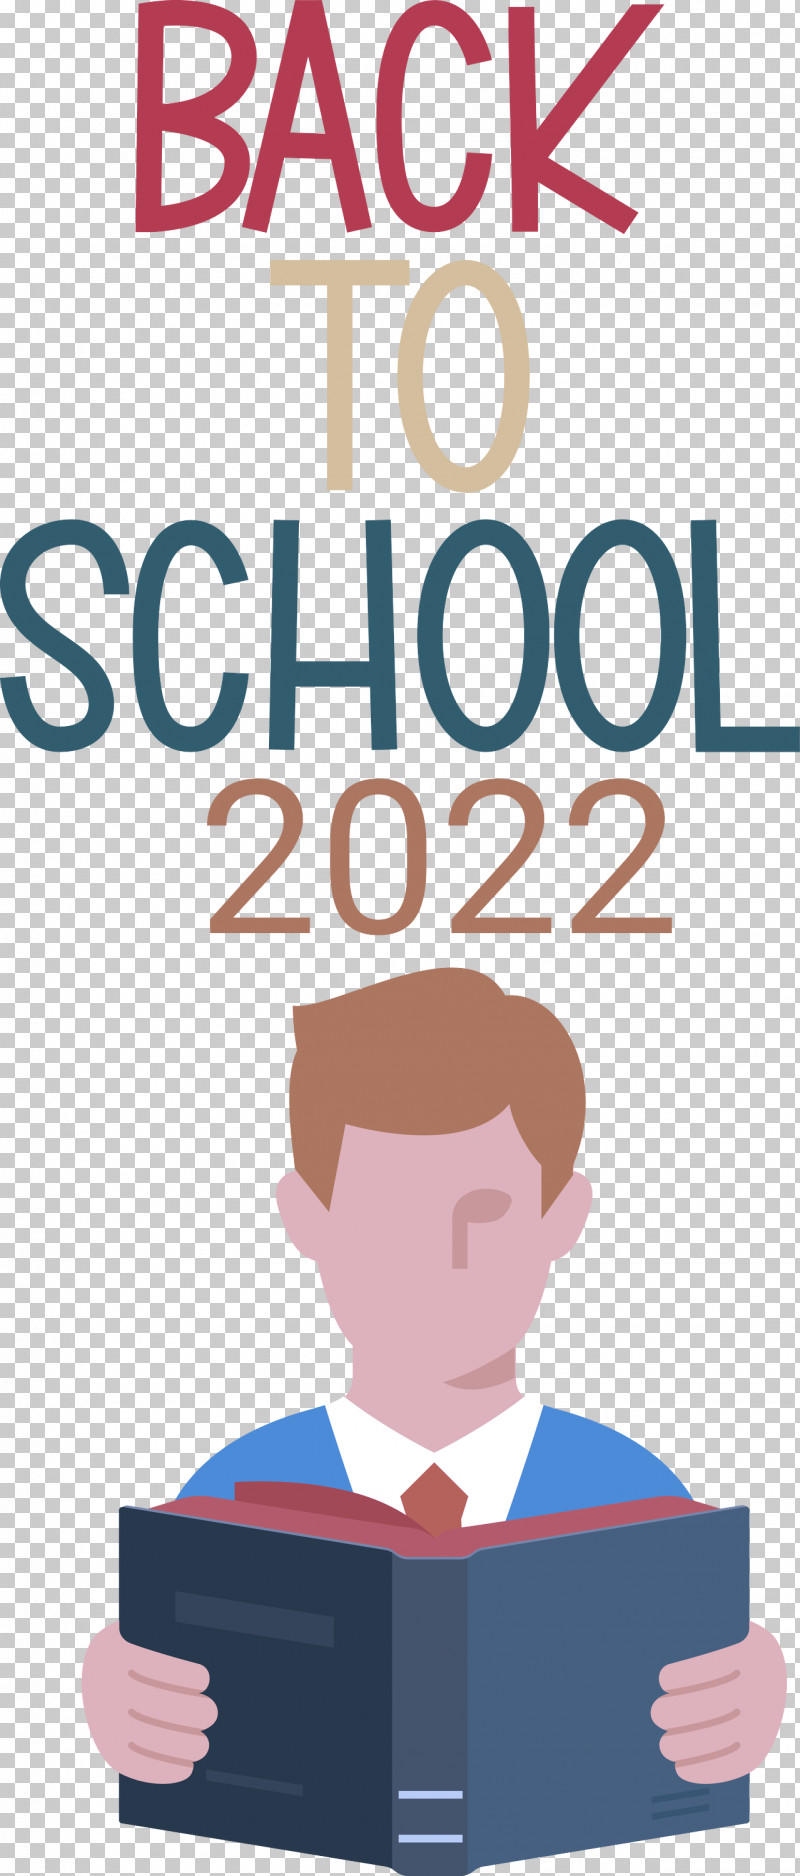 Back To School 2022 PNG, Clipart, Behavior, Business, Cartoon, Human, Line Free PNG Download